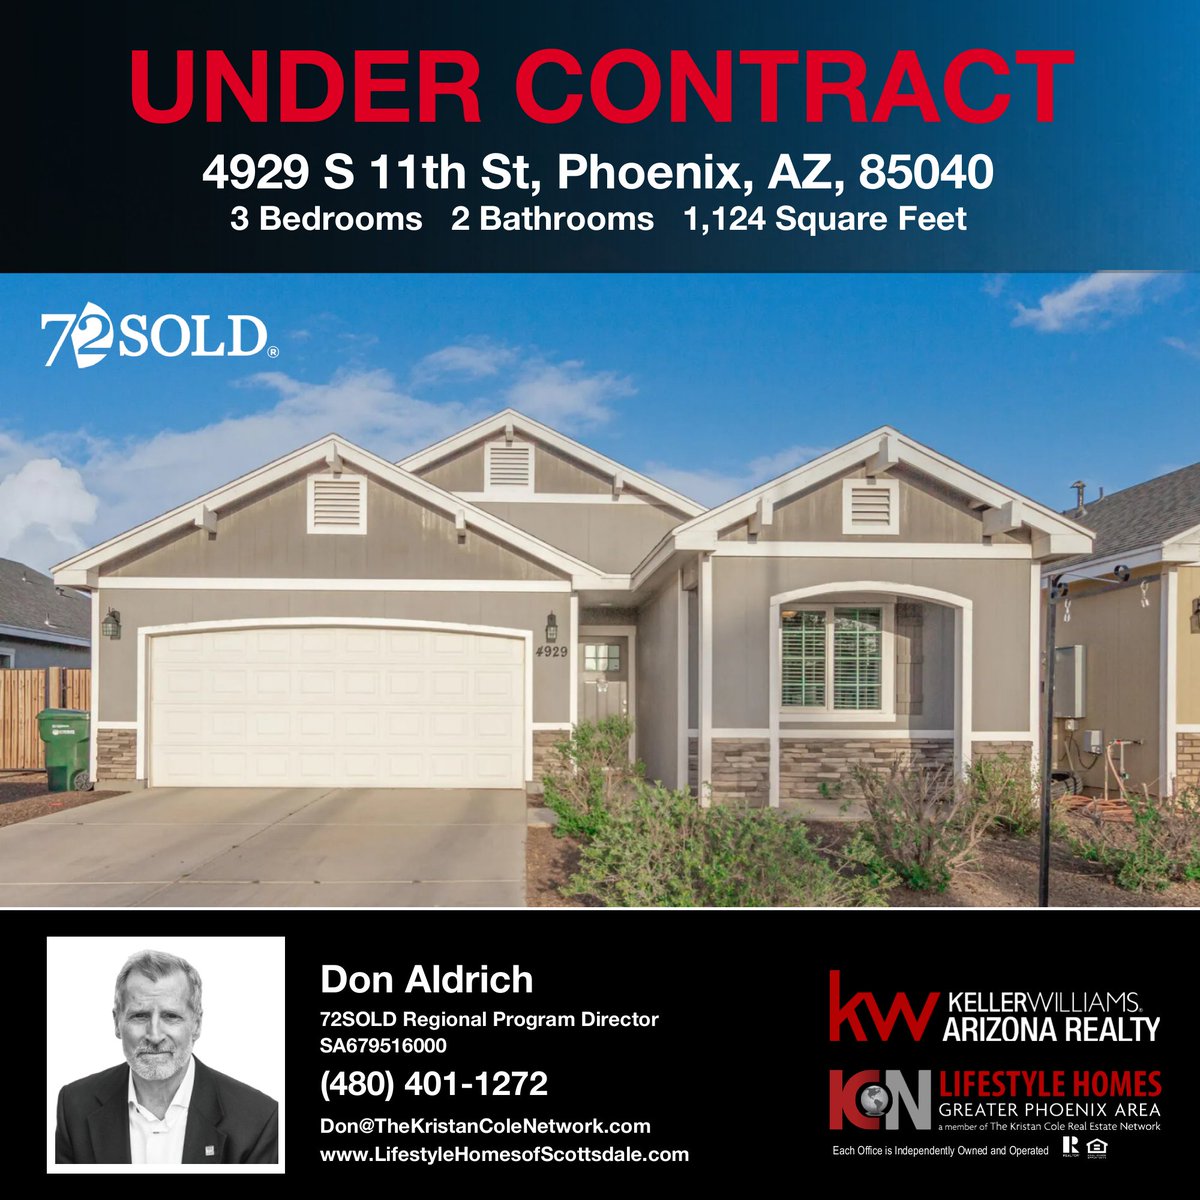 Our buyer's offer for the home in Phoenix has been accepted!

Selling or buying a home? Contact Don Aldrich at:

☎️ (480) 401-1272
📧 Don@TheKristanColeNetwork.com
🌐 lifestylehomesofscottsdale.com

Check your home value here -> lifestylehomesworldwide.com/homevalue

#iloverealestate